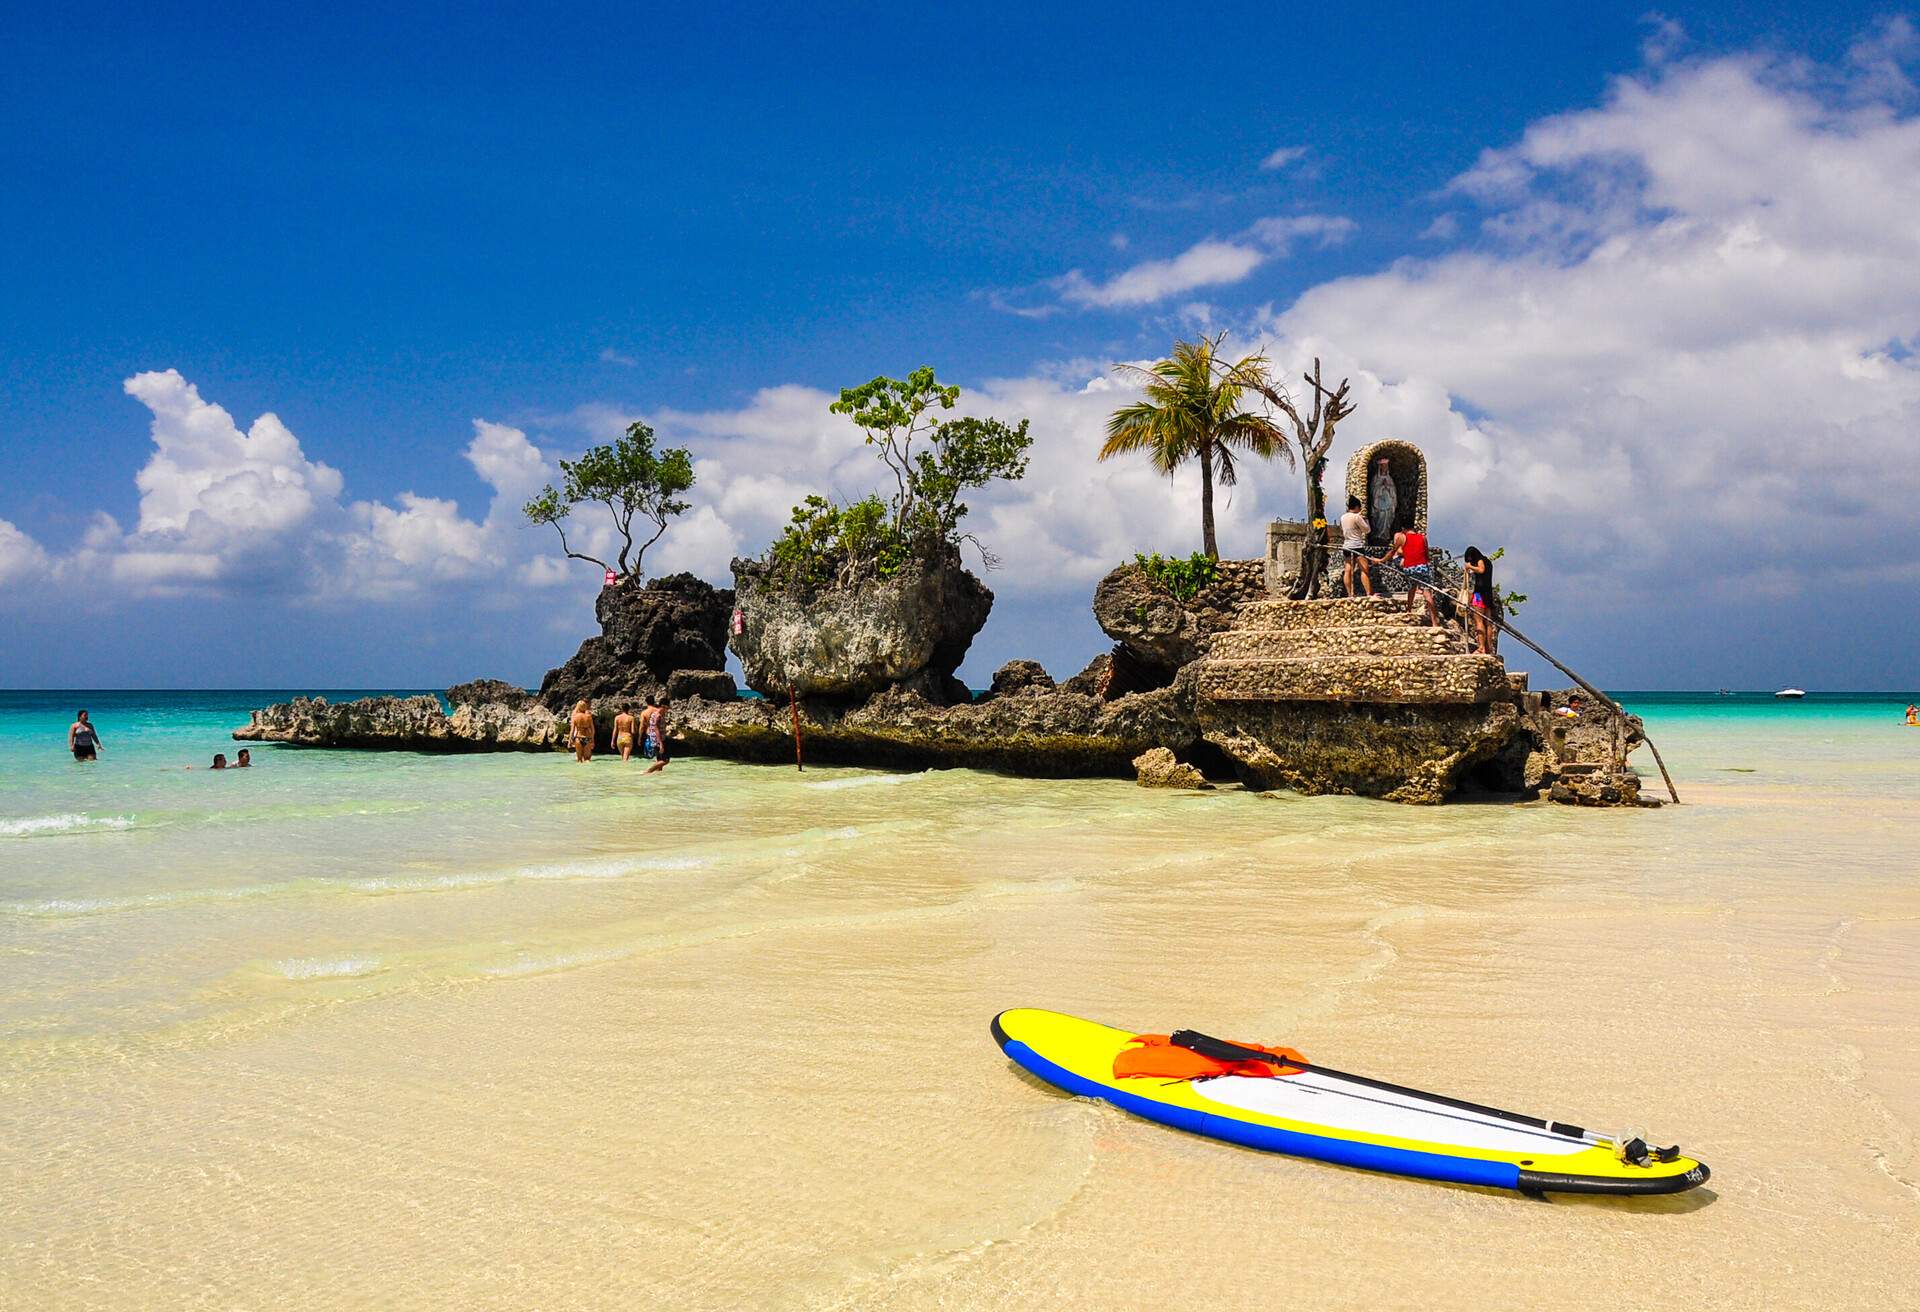 PHILIPPINES_AKLAN_BORACAY_WILLY_S-ROCK-FORMATION-WITH-COLORFUL-PADDLE-BOAT